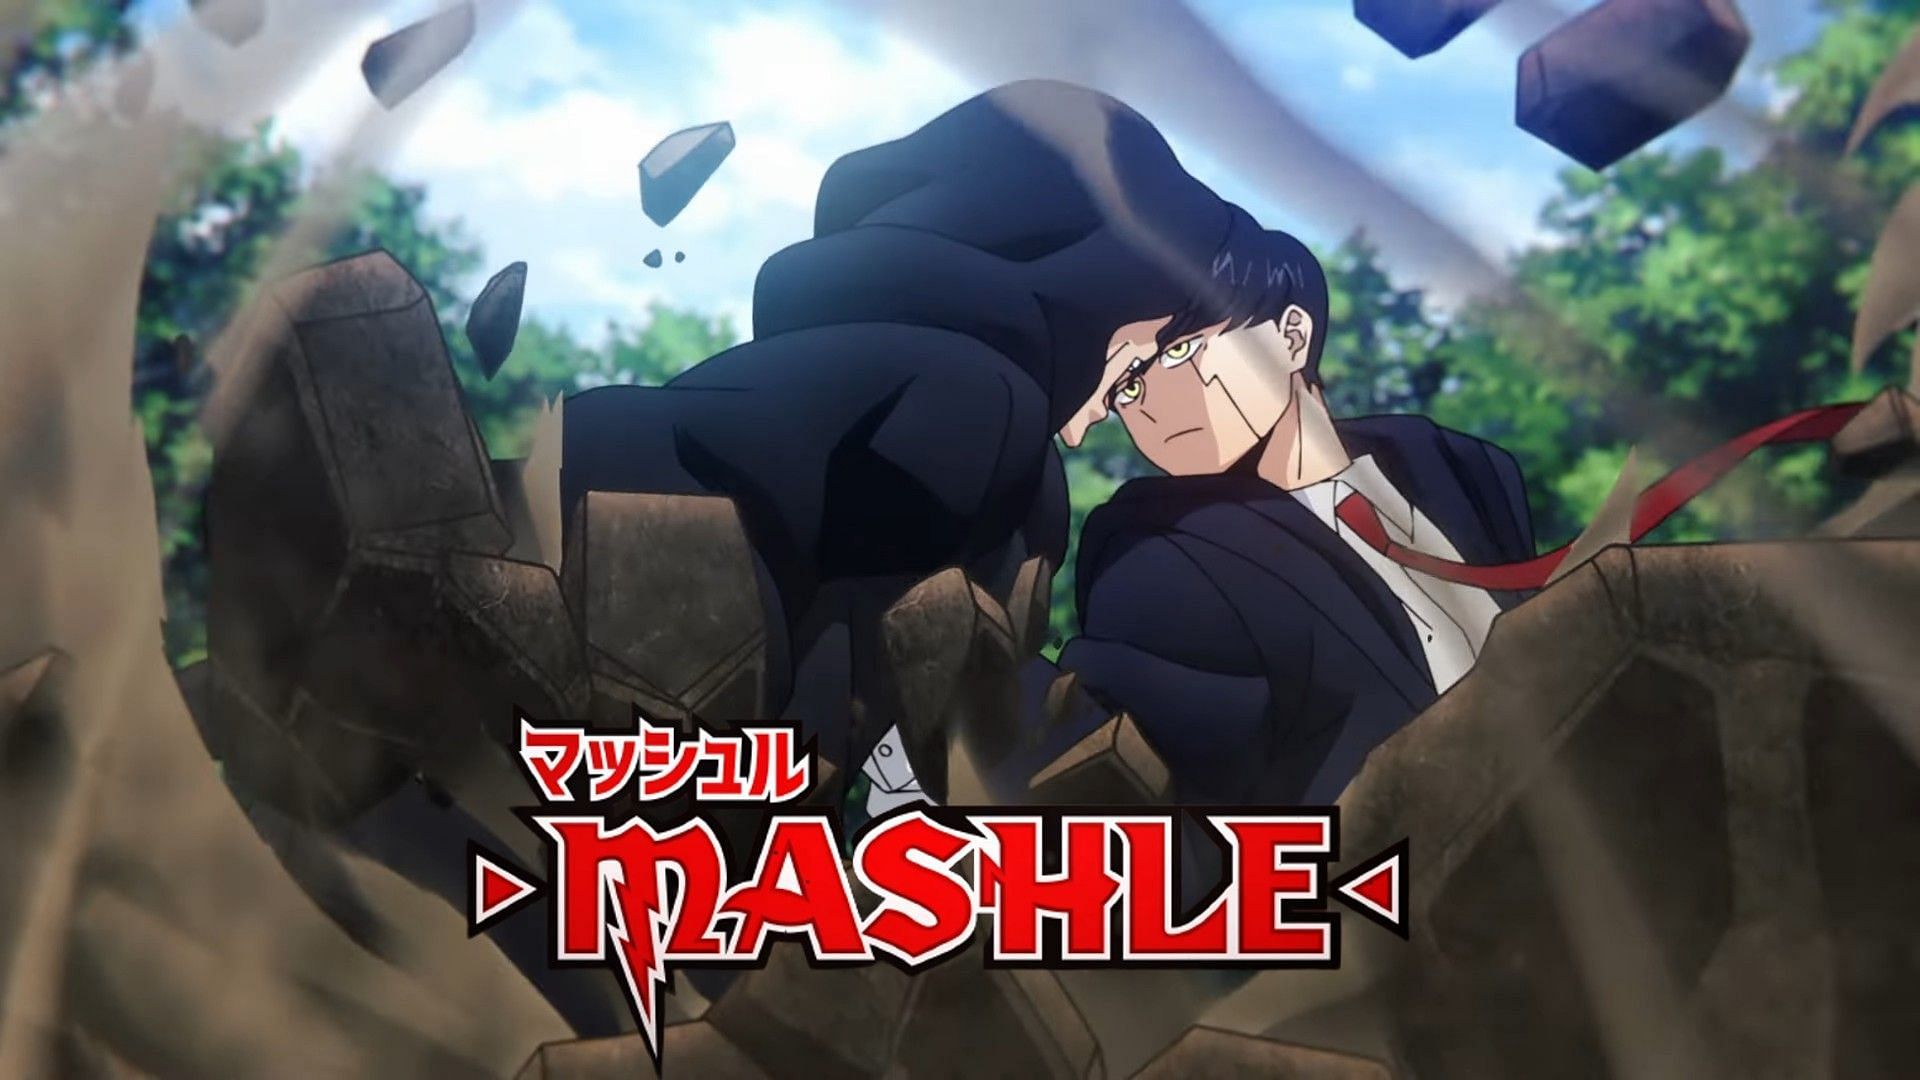 Mashle: Magic and Muscles Anime's Promo Video Reveals 4 Cast